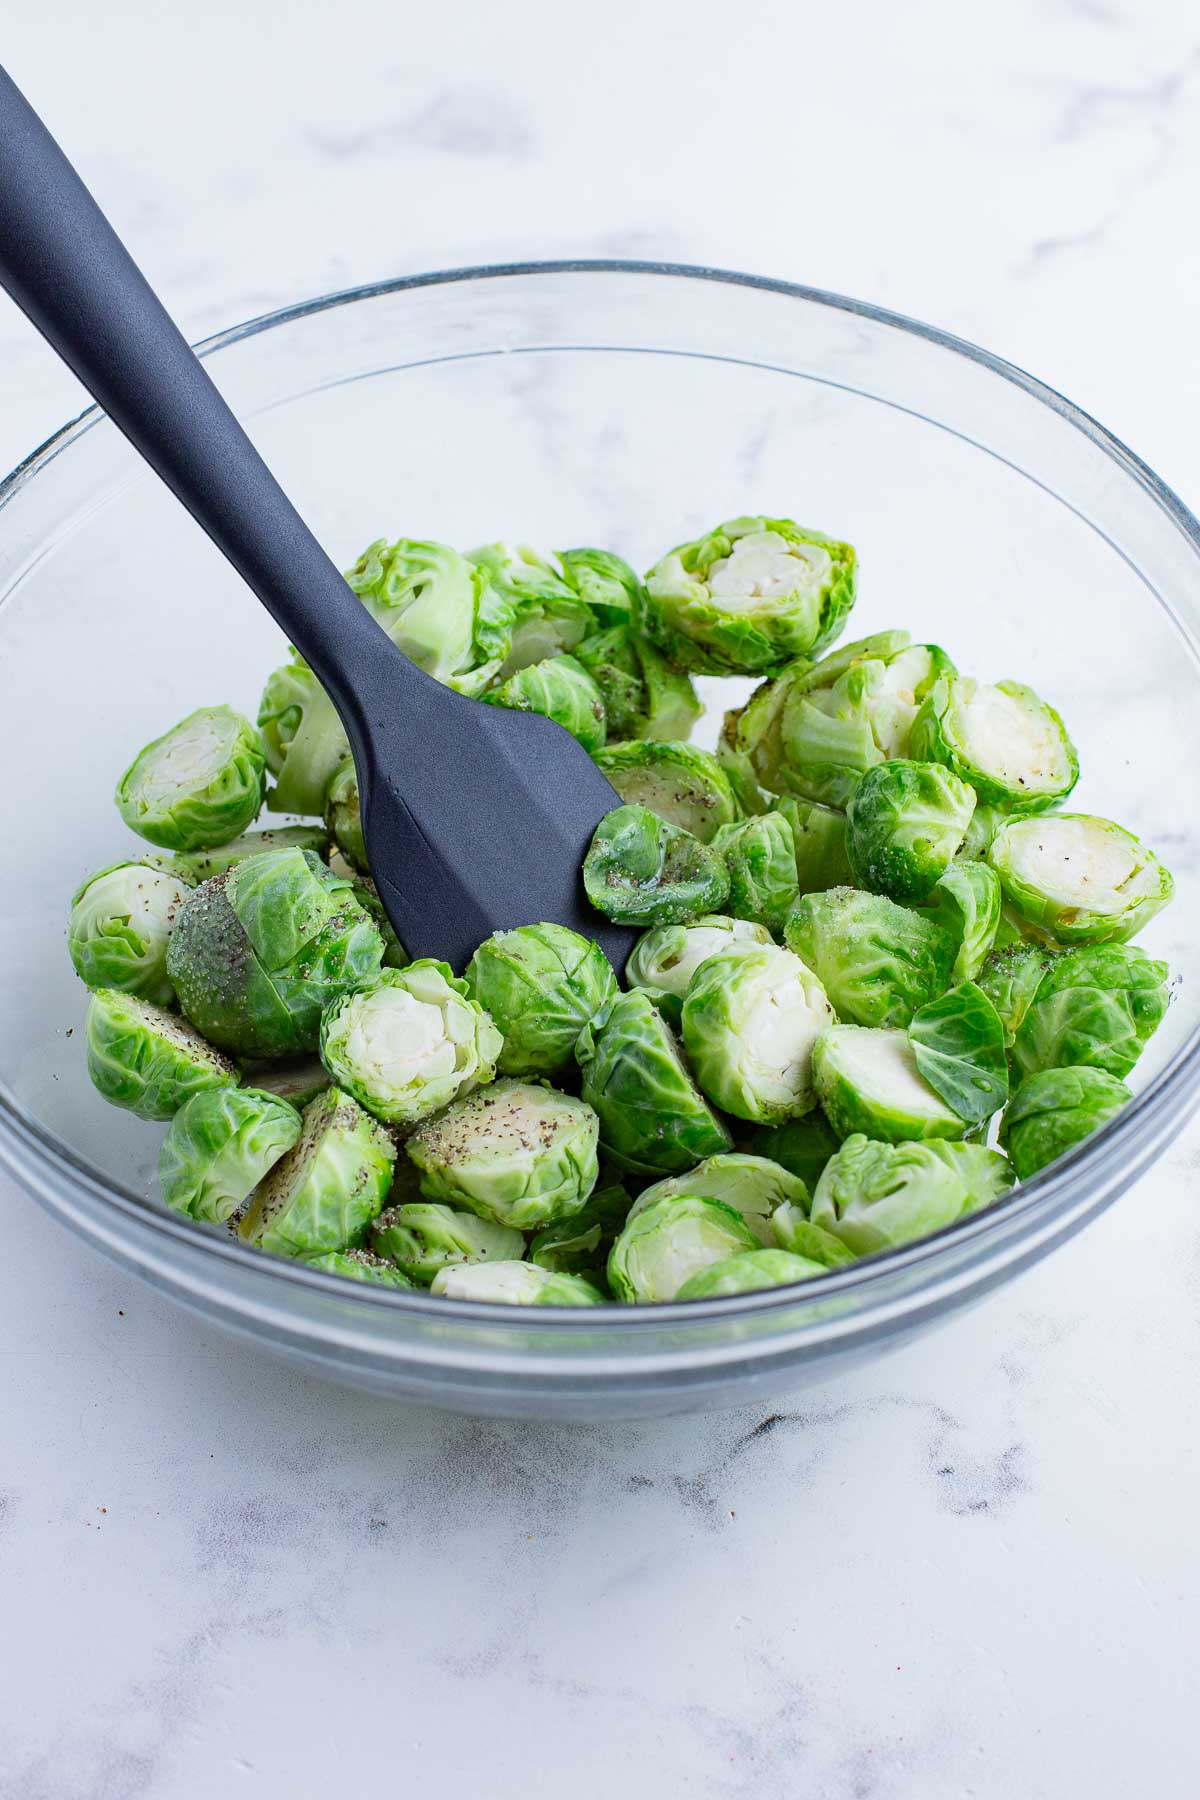 Brussels sprouts are seasoned before baking.